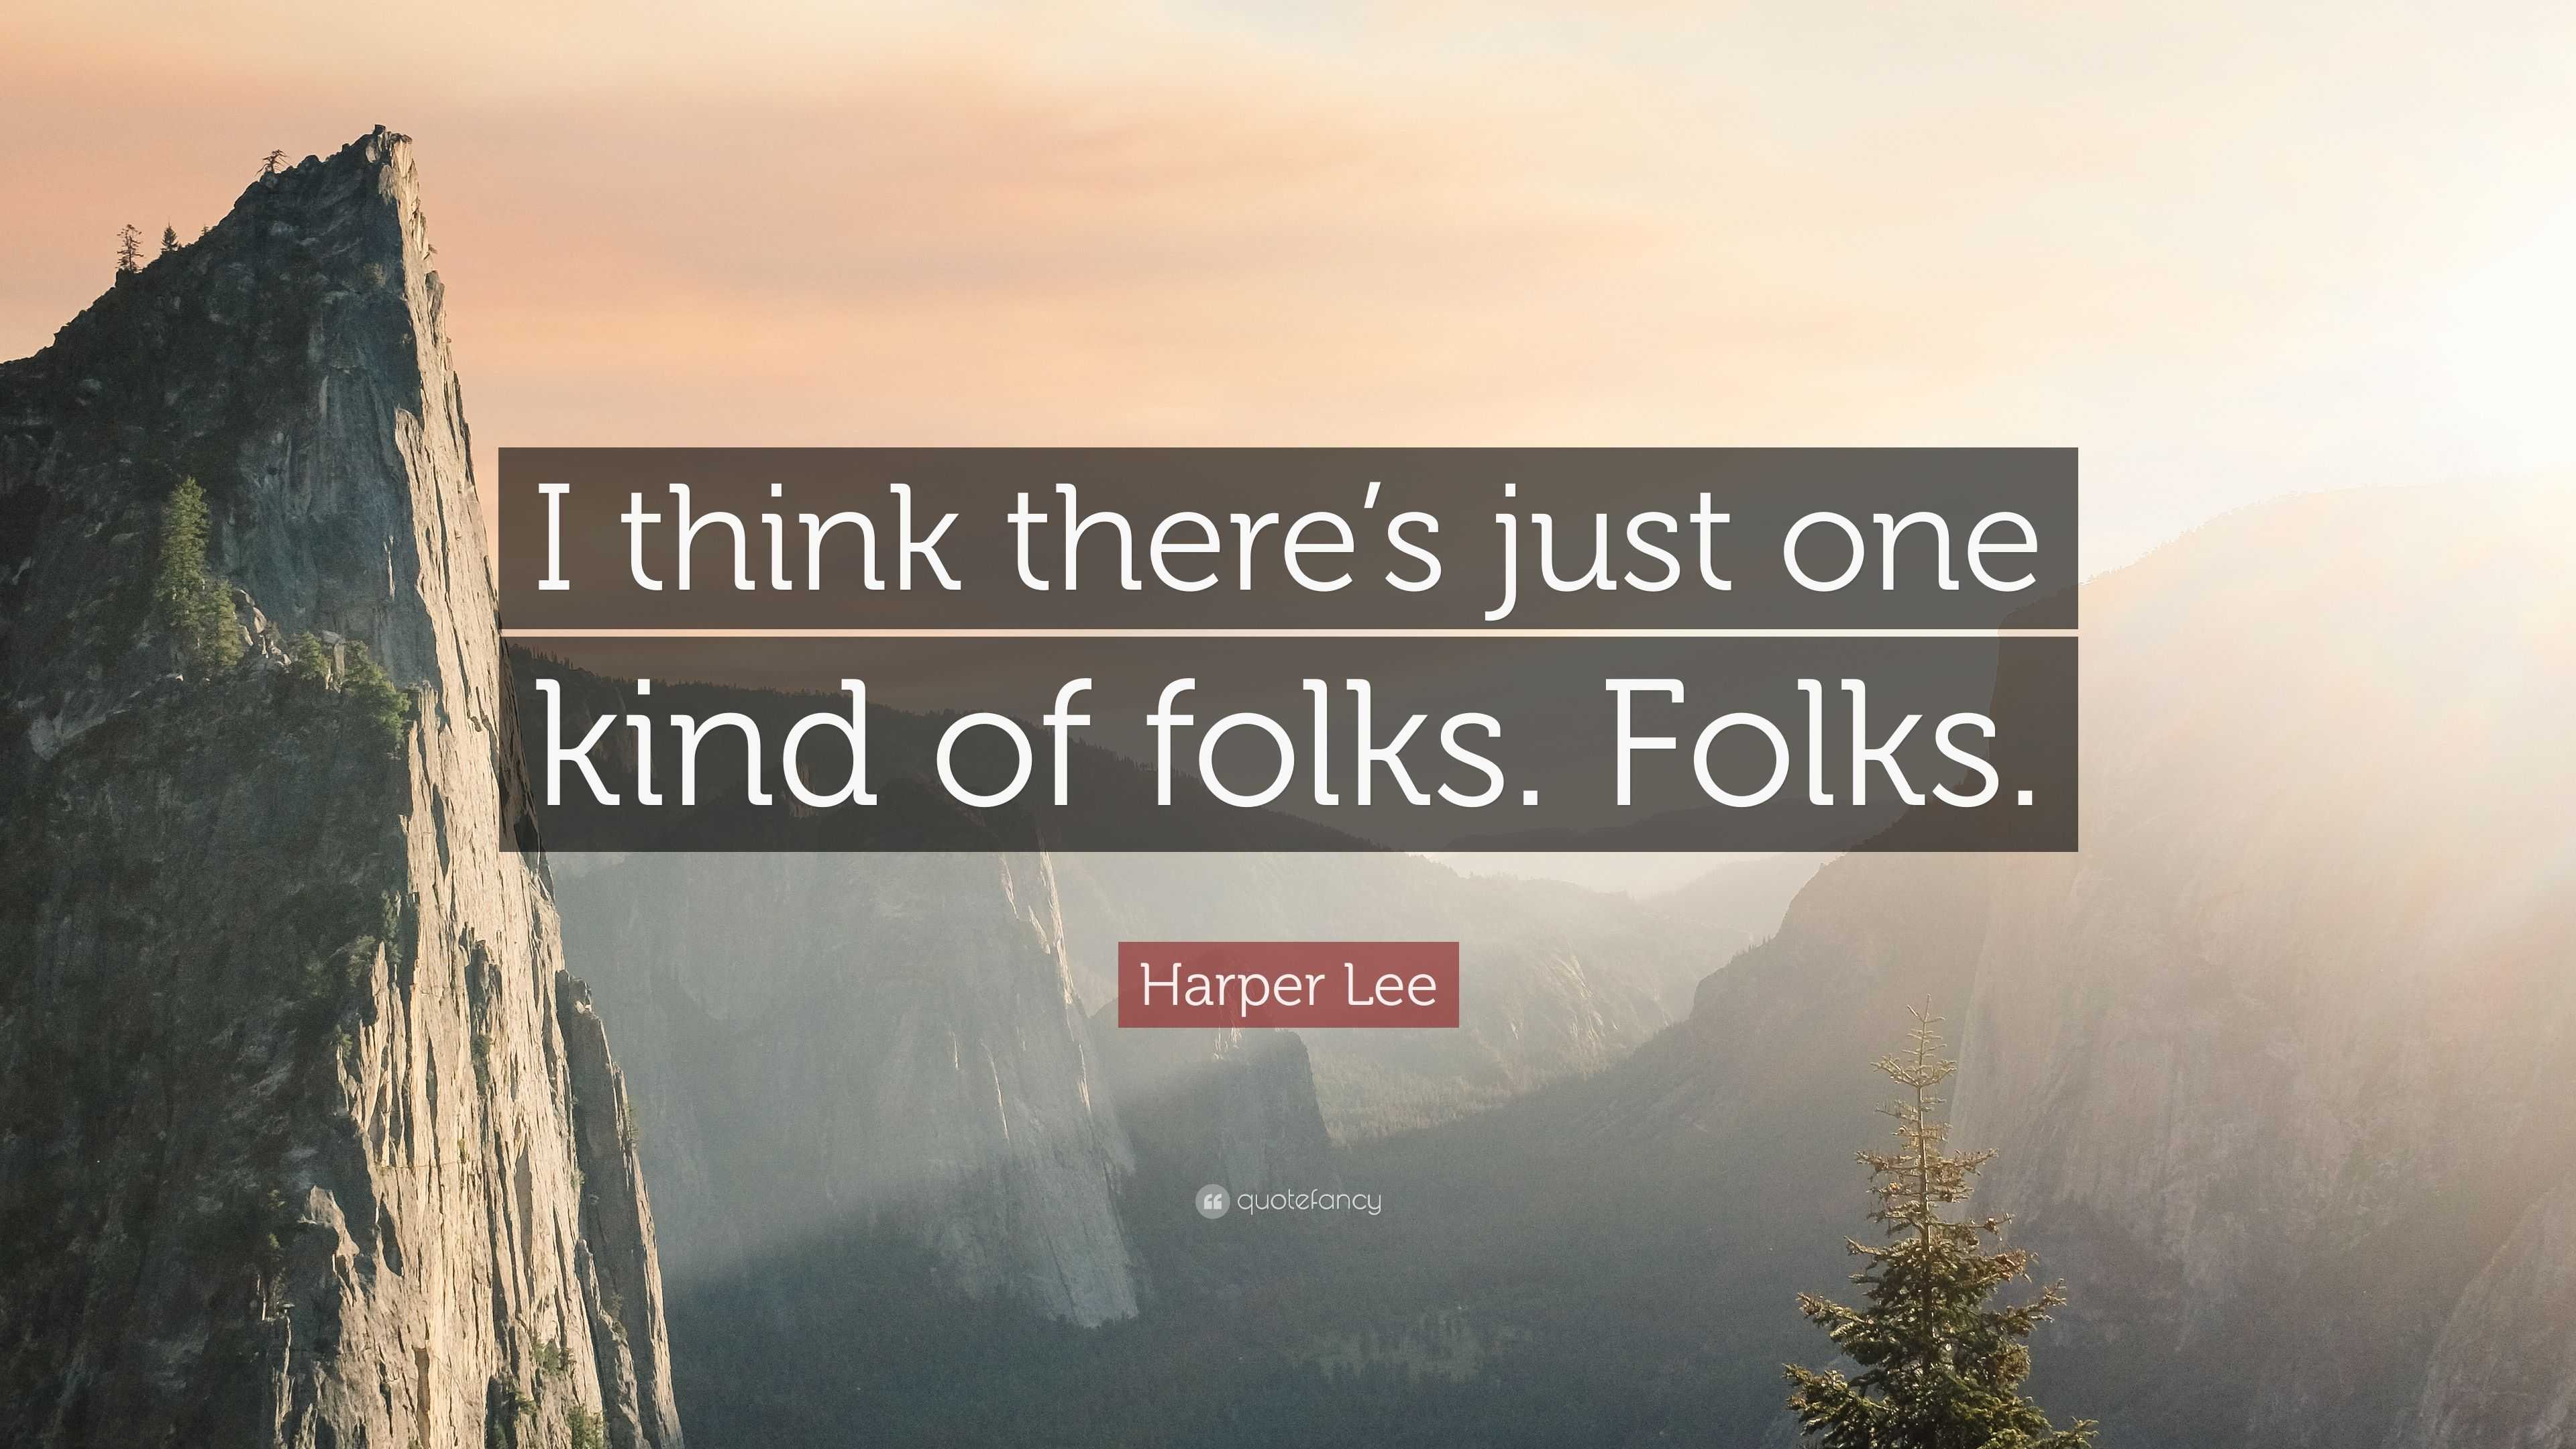 Harper Lee Quote: “I think there’s just one kind of folks. Folks.”